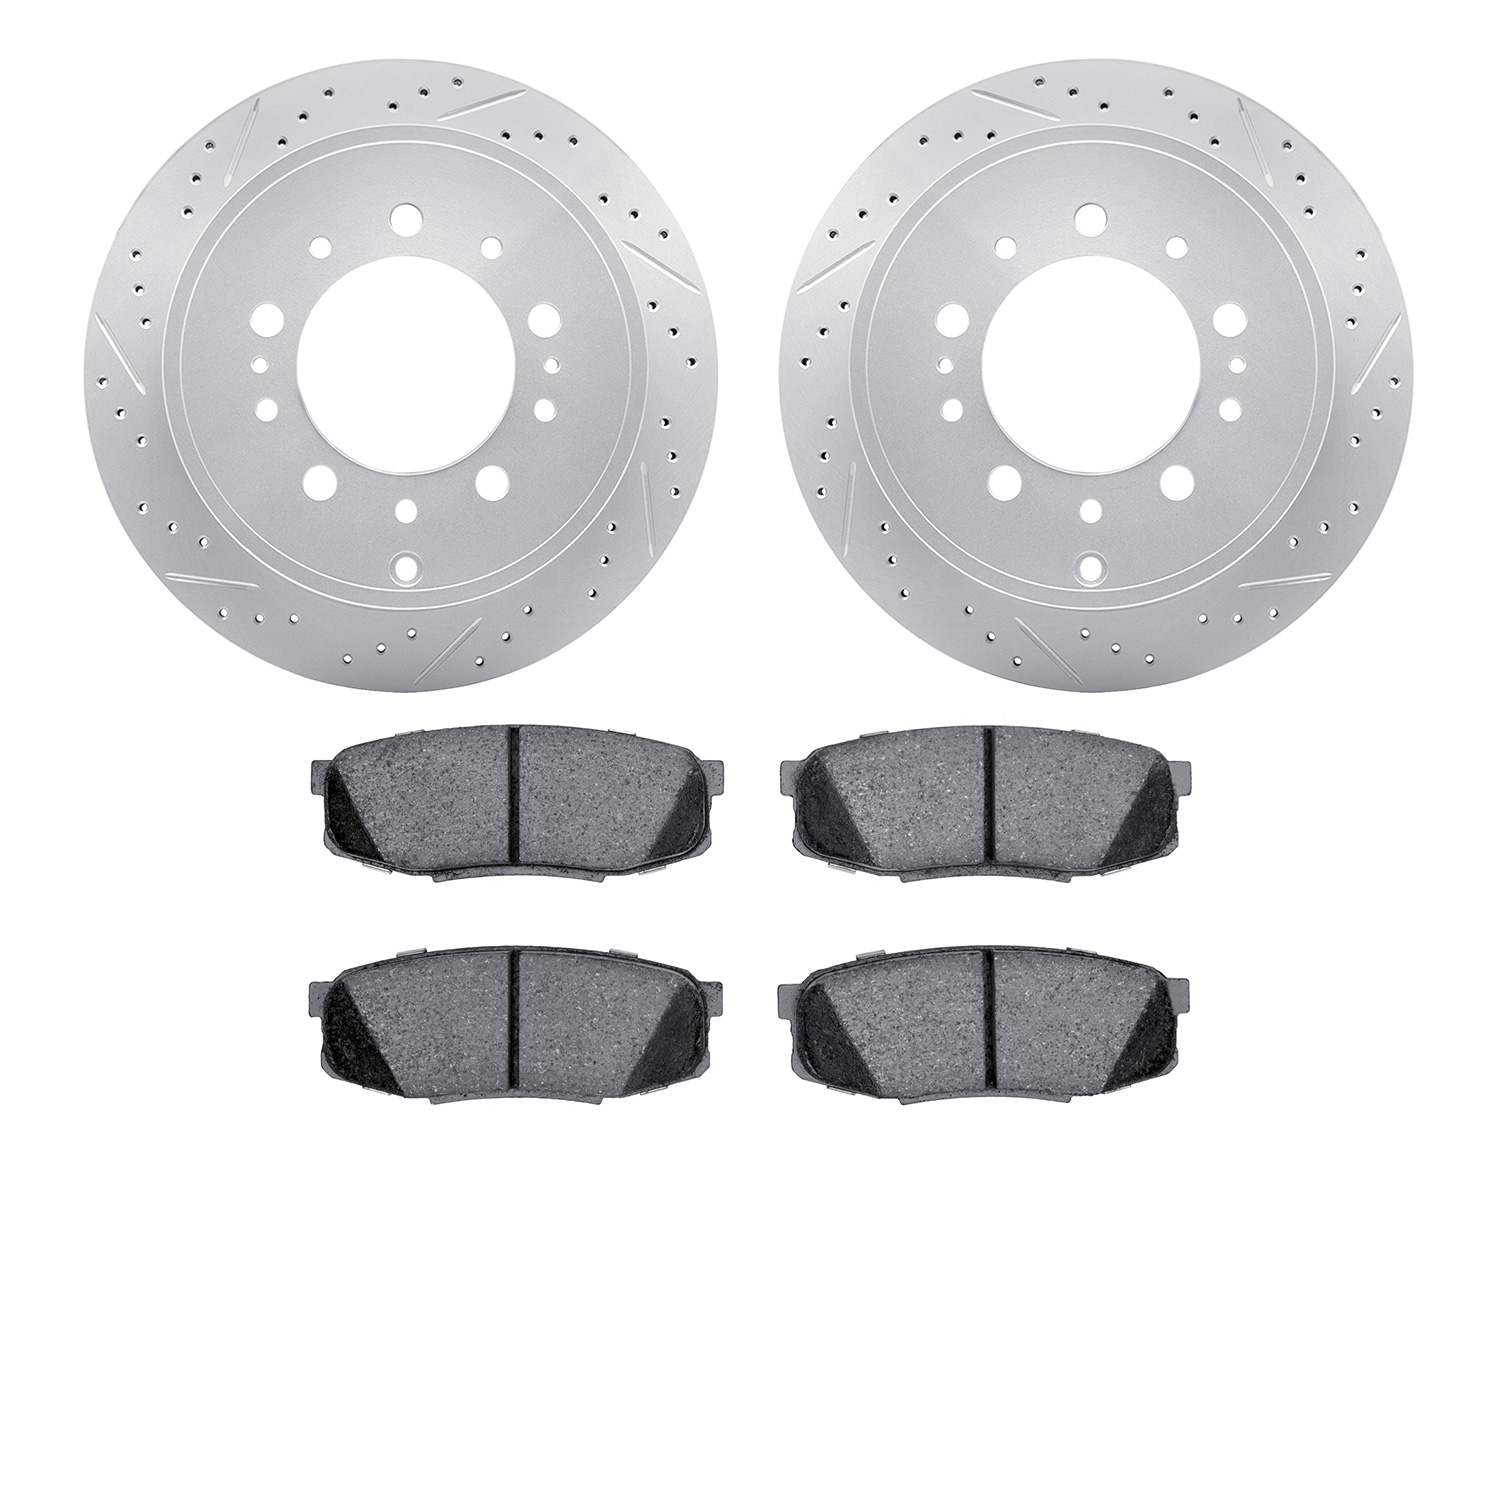 2202-76006 Geoperformance Drilled/Slotted Rotors w/Heavy-Duty Pads Kit, Fits Select Lexus/Toyota/Scion, Position: Rear